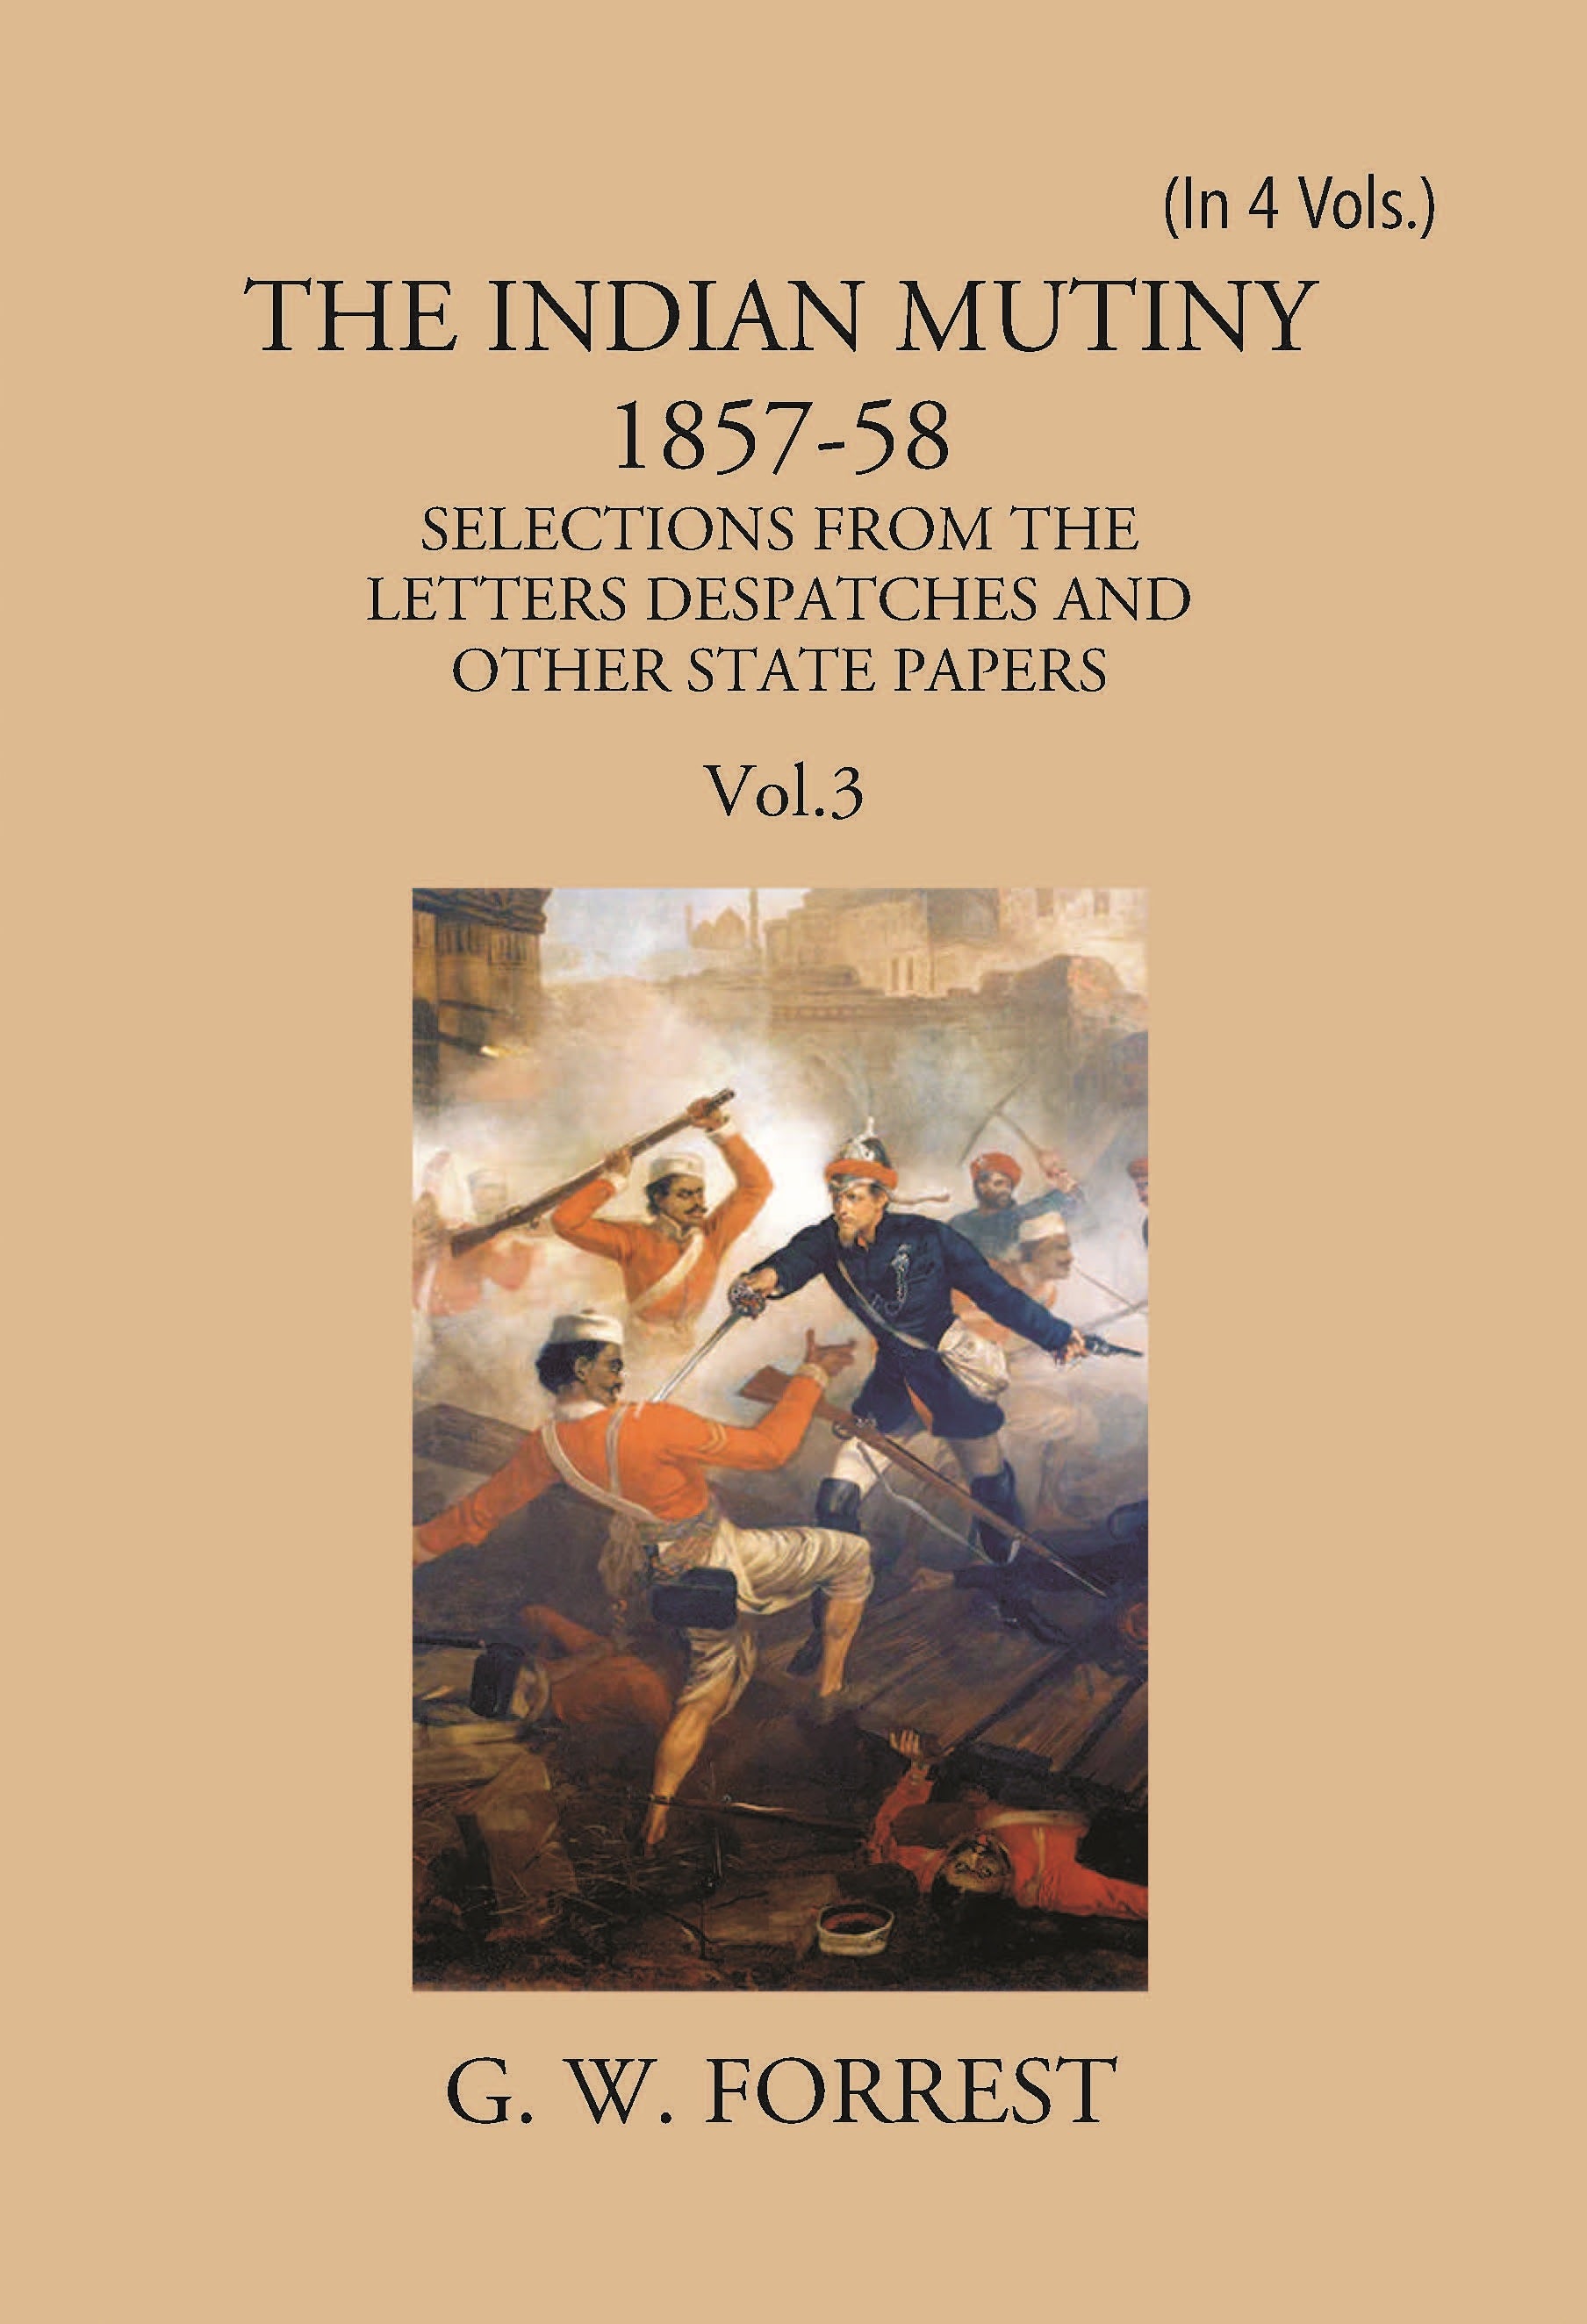 The Indian Mutiny 1857-58: Selections From The Letters Despatches And Other State Papers Preserved In The Military Department Of The Government Of India 1857-58 Volume Vol. 3rd